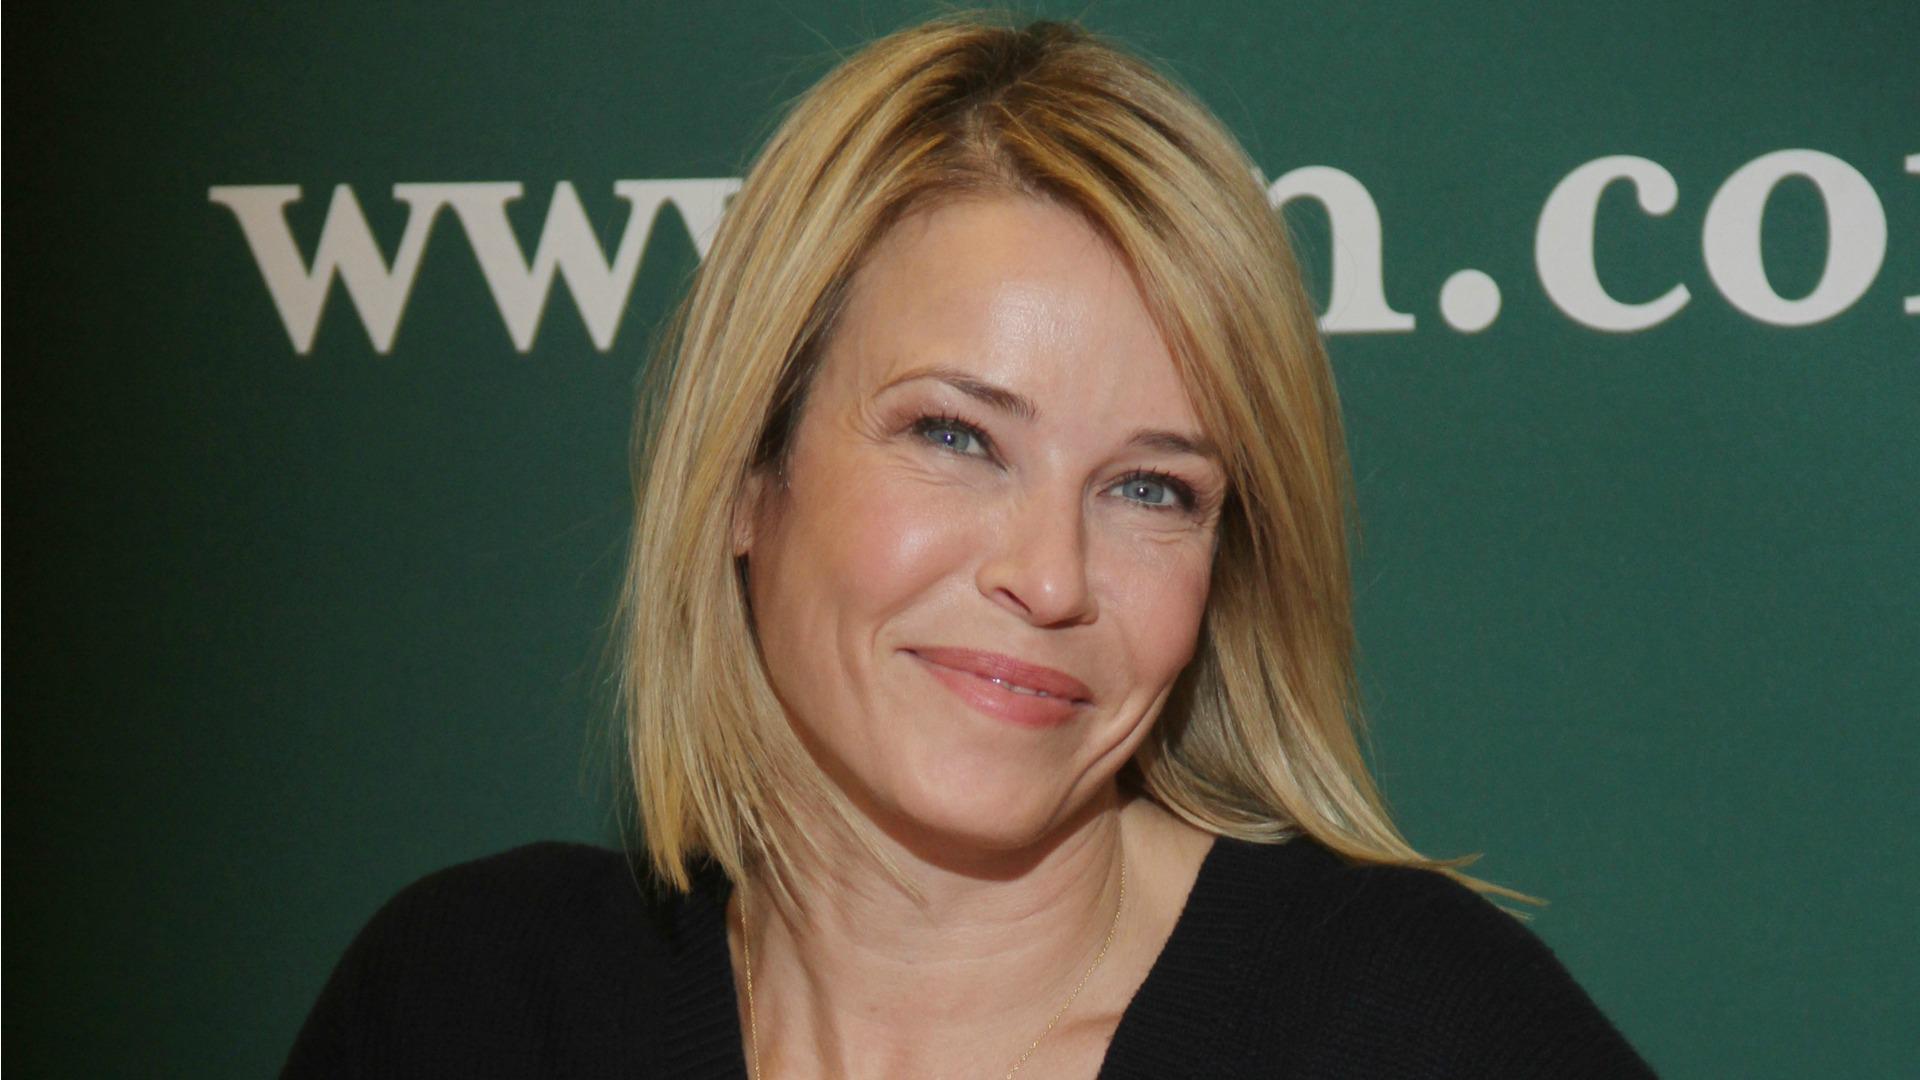 Moving on: Netflix nabs Chelsea Handler for new talk show